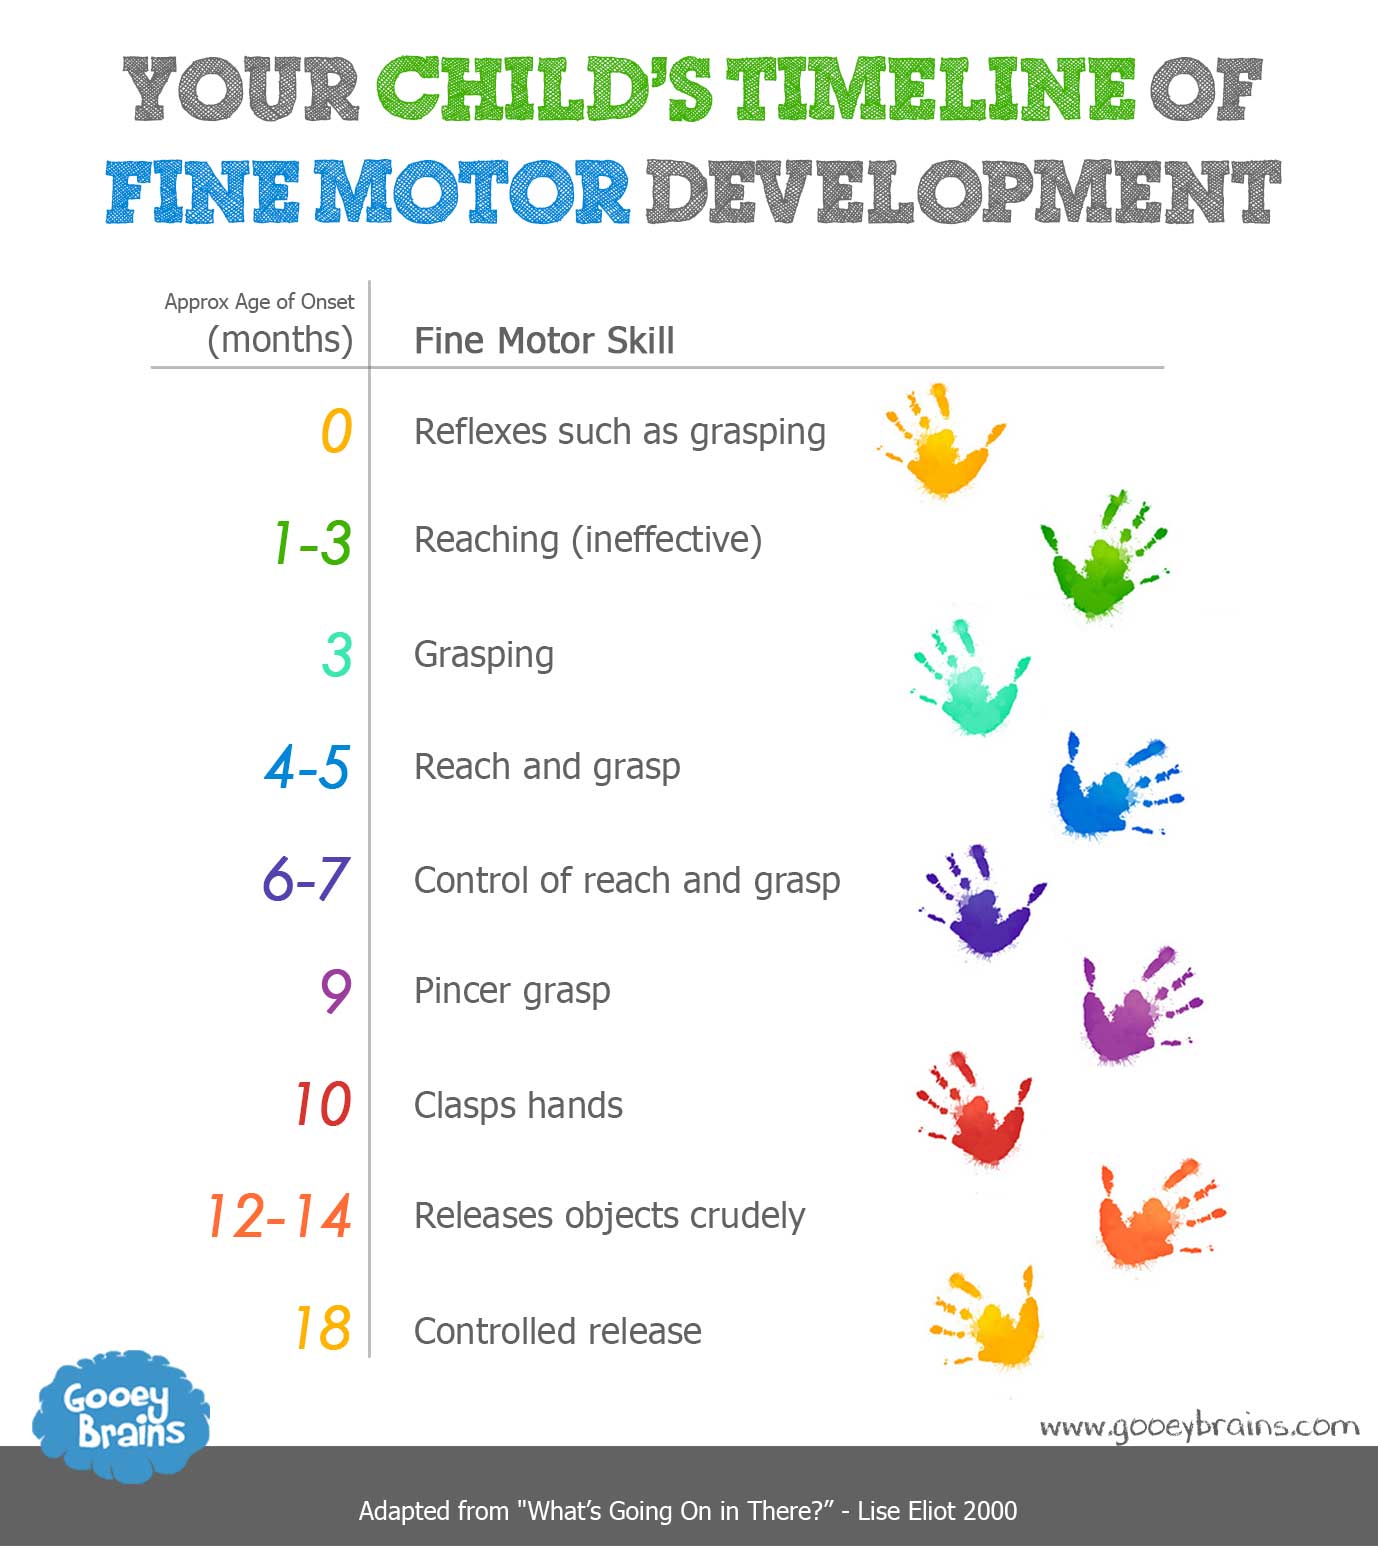 Child Development | Motor Skills 101 - What to expect and when!